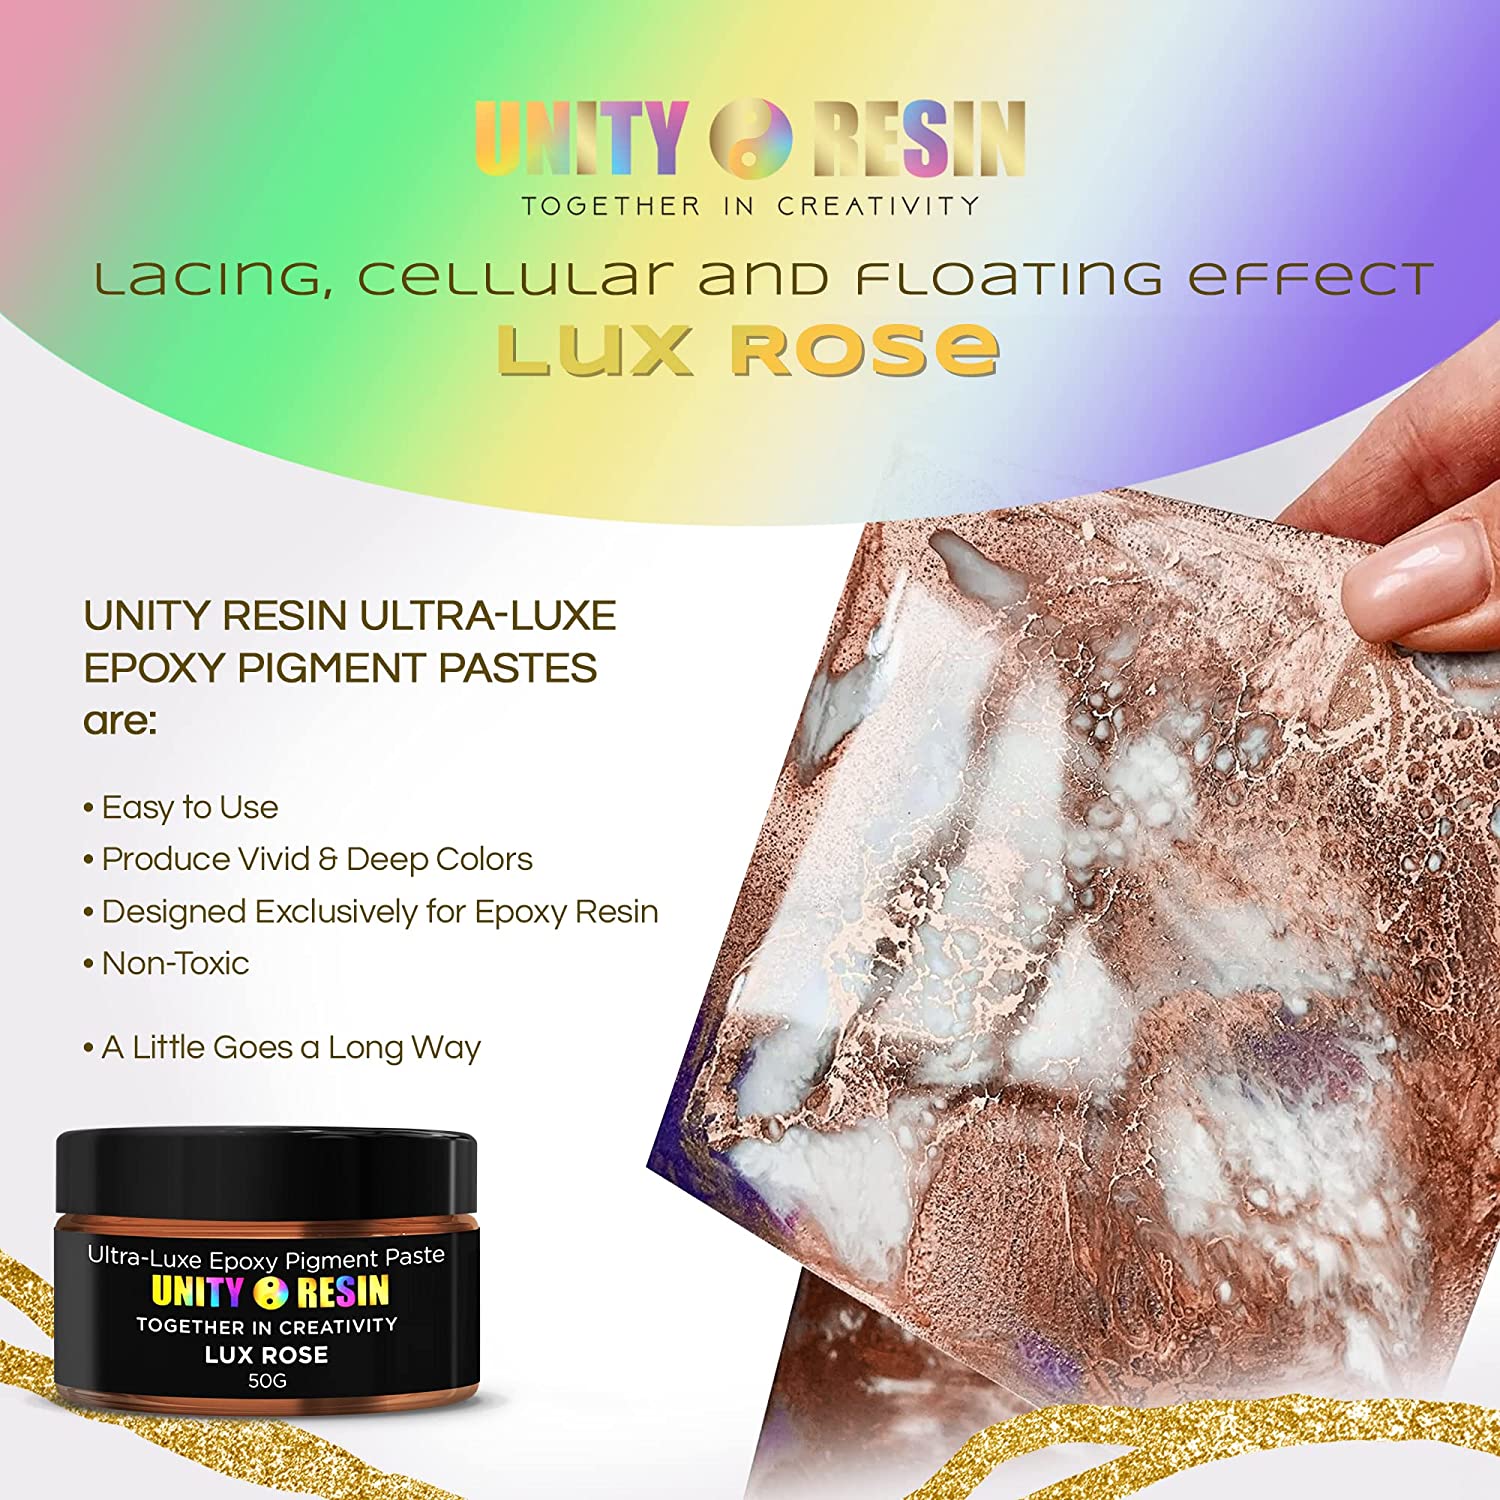 gold resin, resin paint, gold mica powder for resin, epoxy resin art, gold pigment, gold pigment paste, resin paste, epoxy paint, floating gold pigment, floating gold for resin, gold resin color, resin cells, resin art, resin supplies, epoxy resin, resin craft, gold resin paint, gold paint for resin, rose gold mica powder for epoxy, rose gold epoxy, gold floating pigment for resin, rose gold resin art color